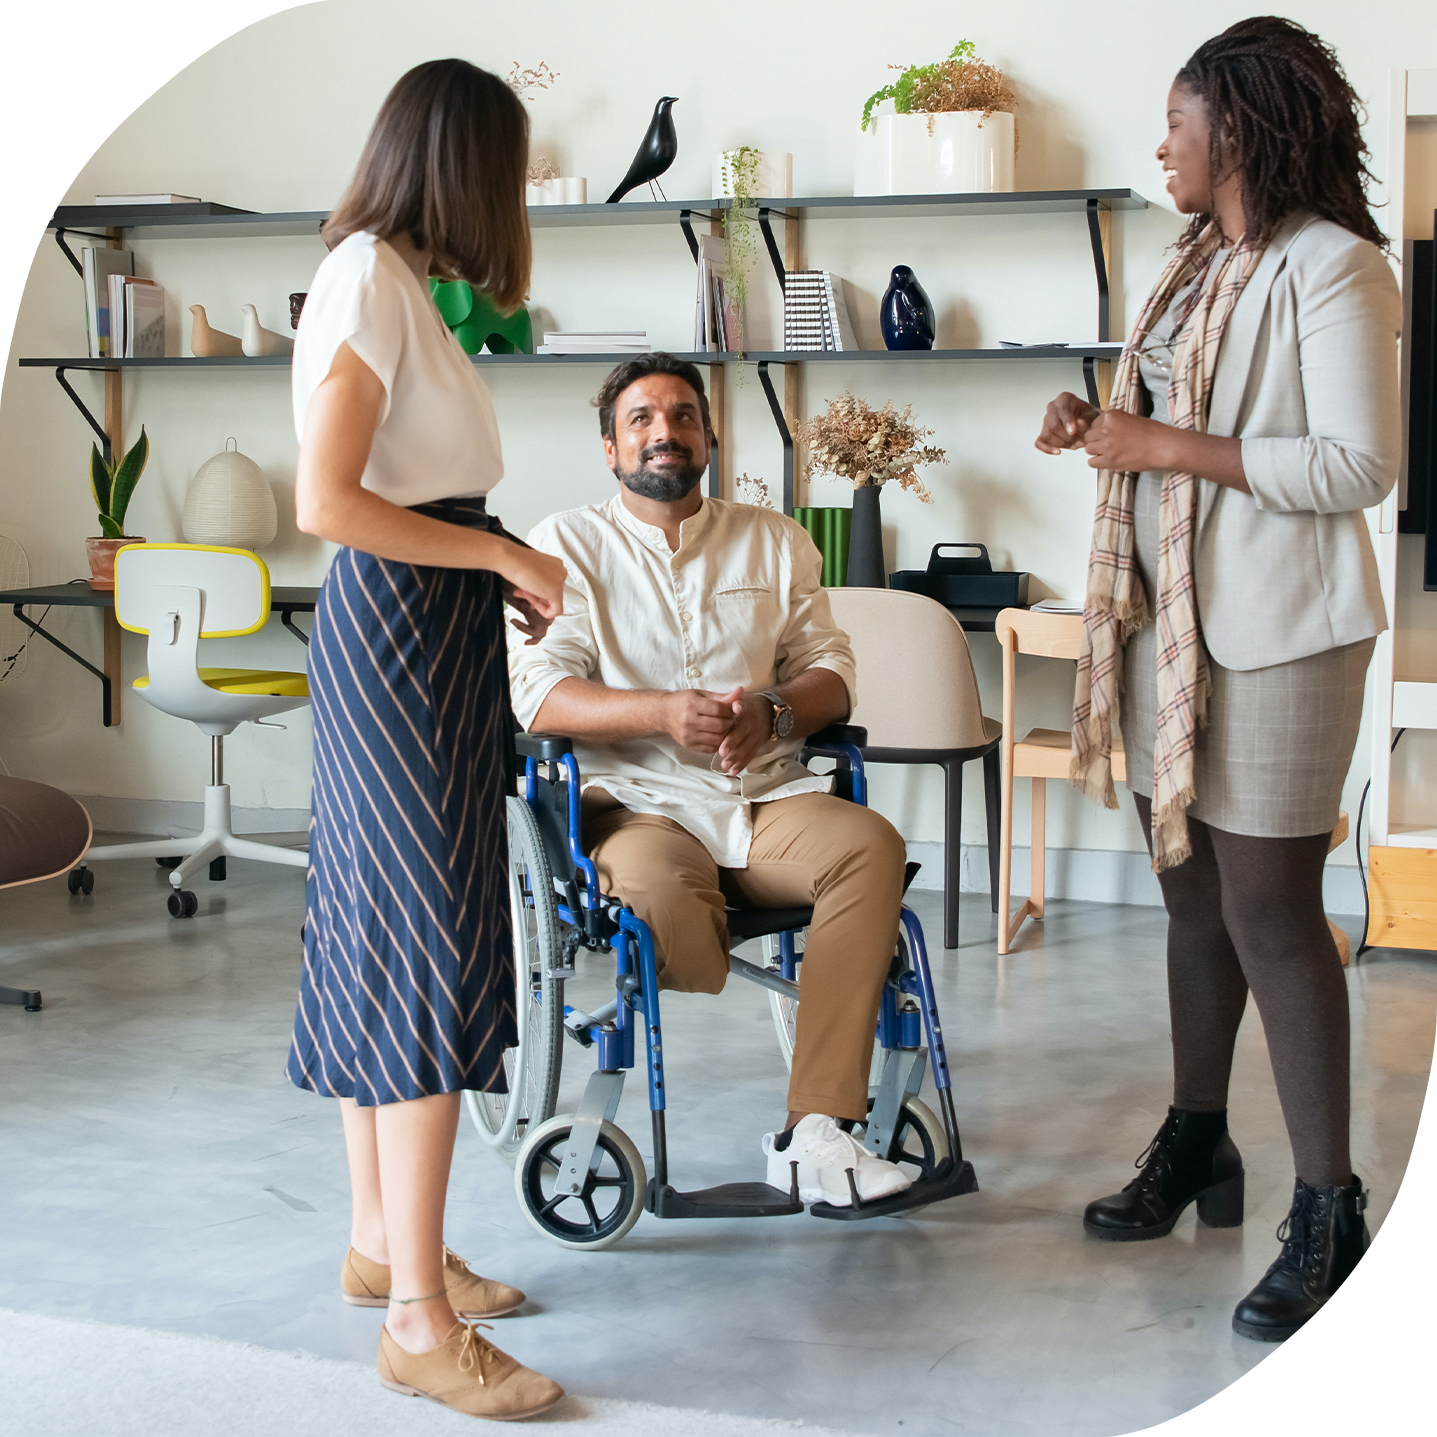 A photo of three co-workers, an Asian woman, a European man in a wheelchair, and a Black woman standing together and chatting at an office.